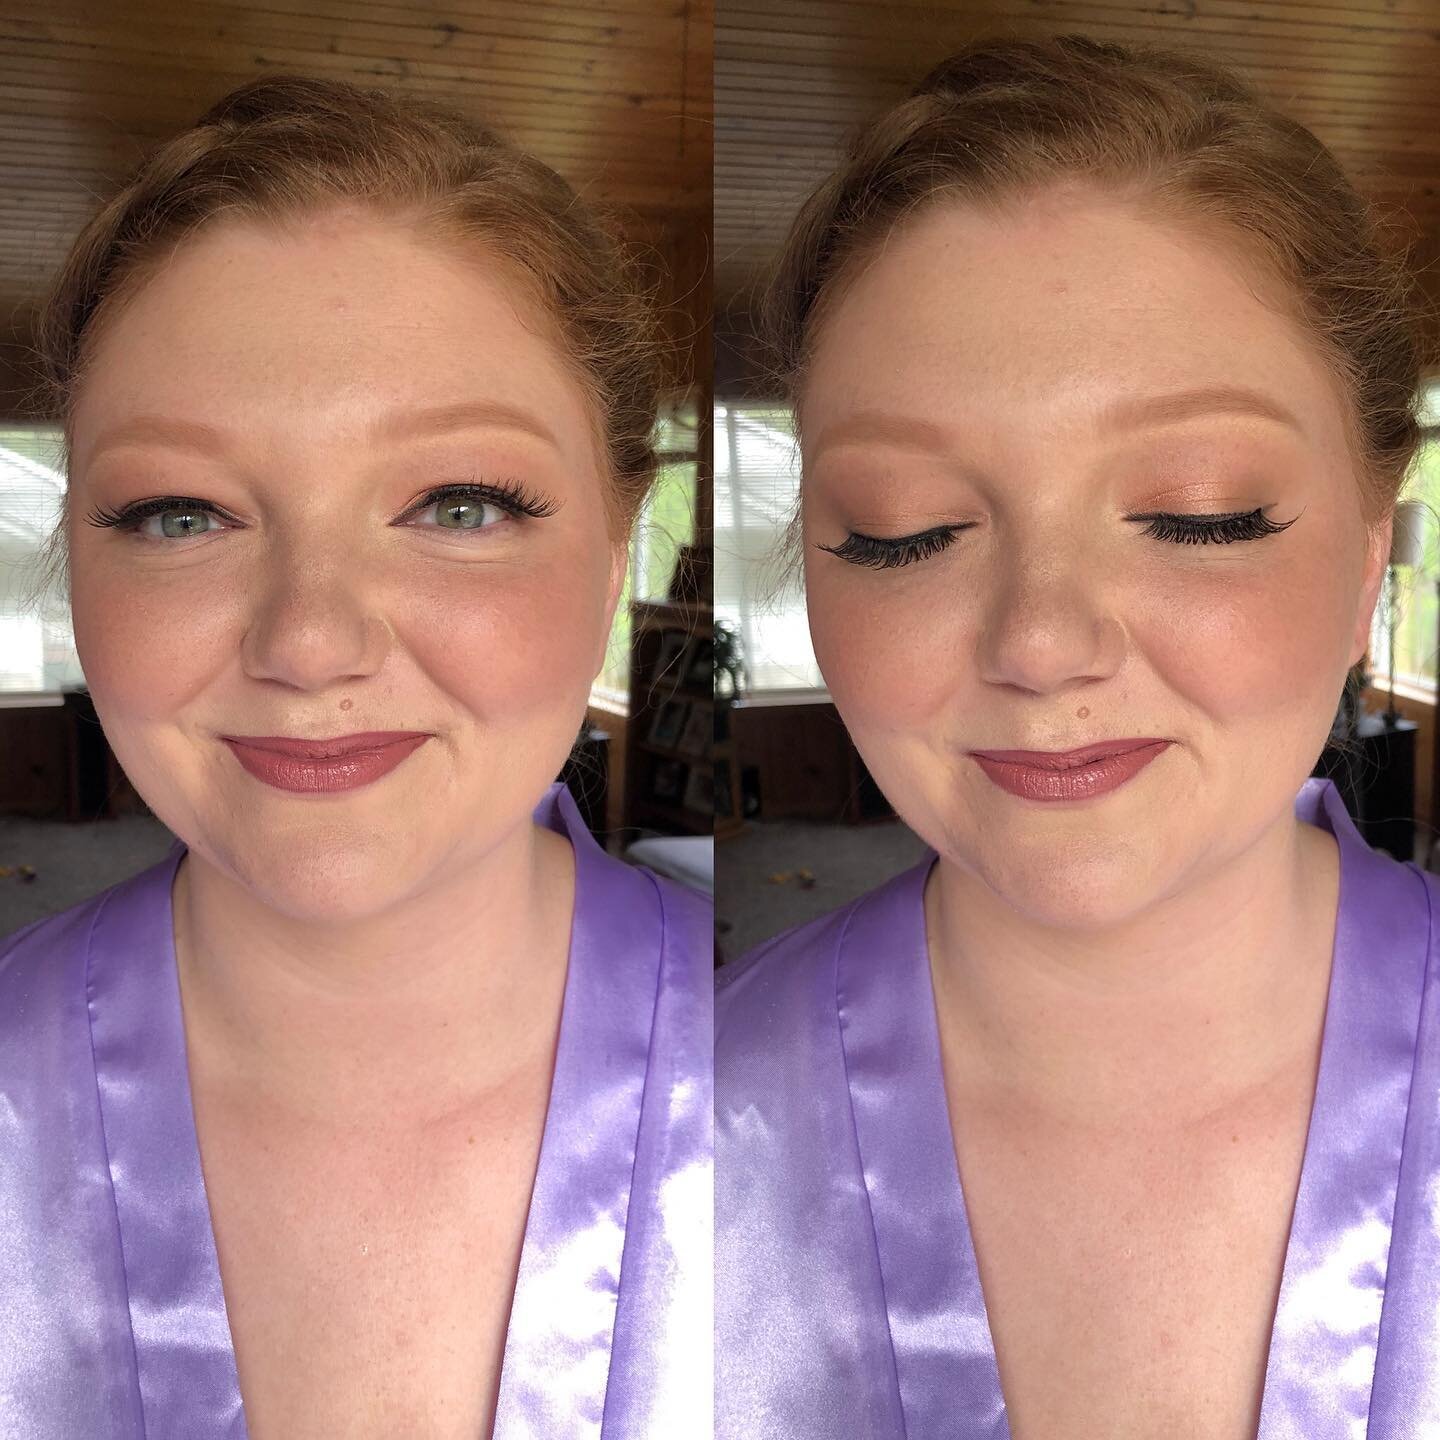 Sooo pretty 😍

For Inquiries-
HTTPS://www.makeupbycaitlin.com

https://www.facebook.com/makeupbycaitlinspah/

Instagram : @caitlinguillien_mua 

PRODUCTS USED
PUR 4 in 1 concealer, powder, visionary palette, and fully charged mascara
GRAFTOBIAN foun